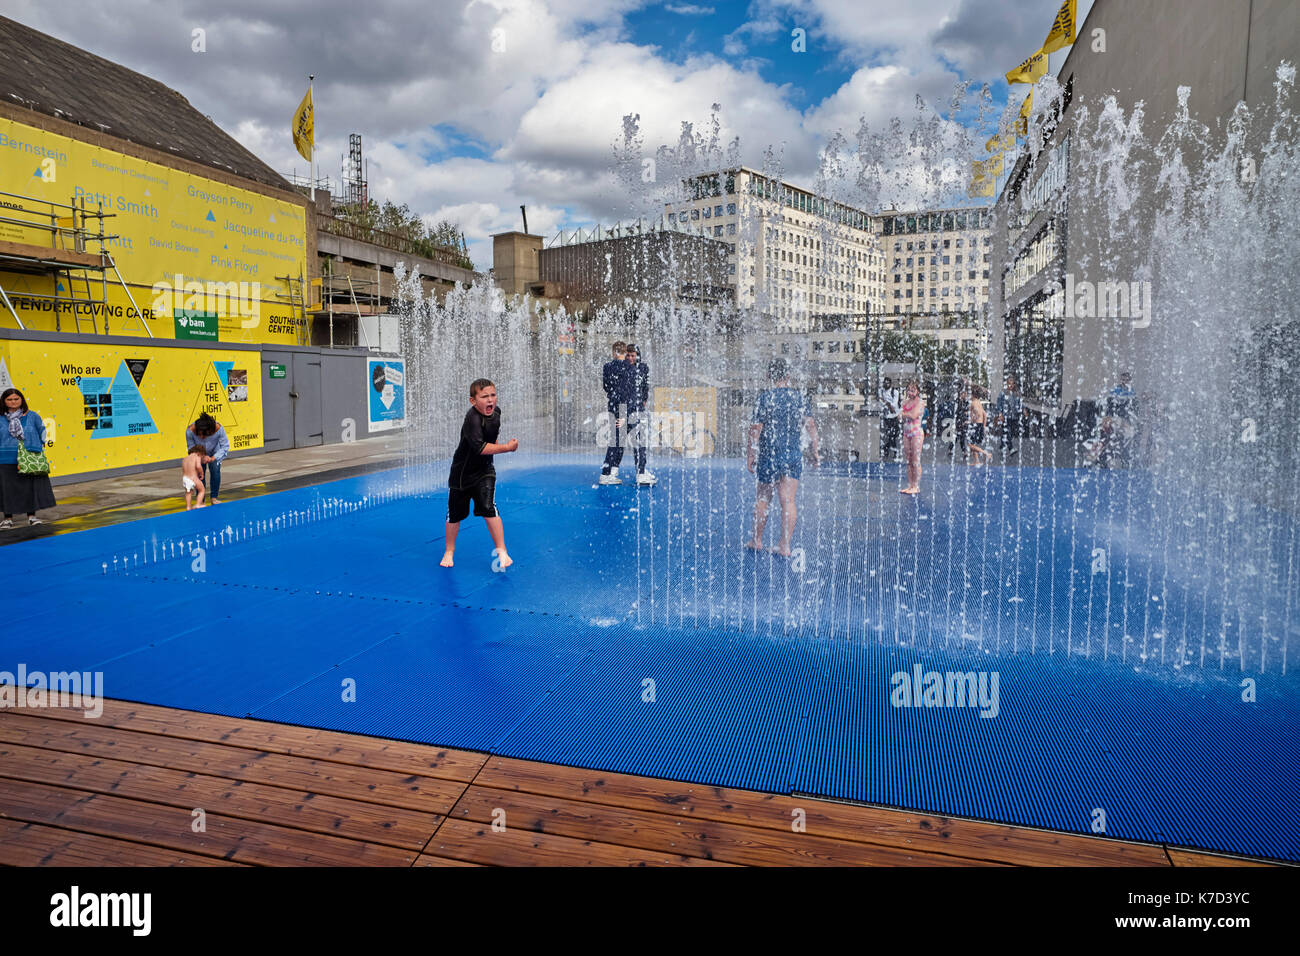 Small boy shouting in fountains at Southbank, London Stock Photo